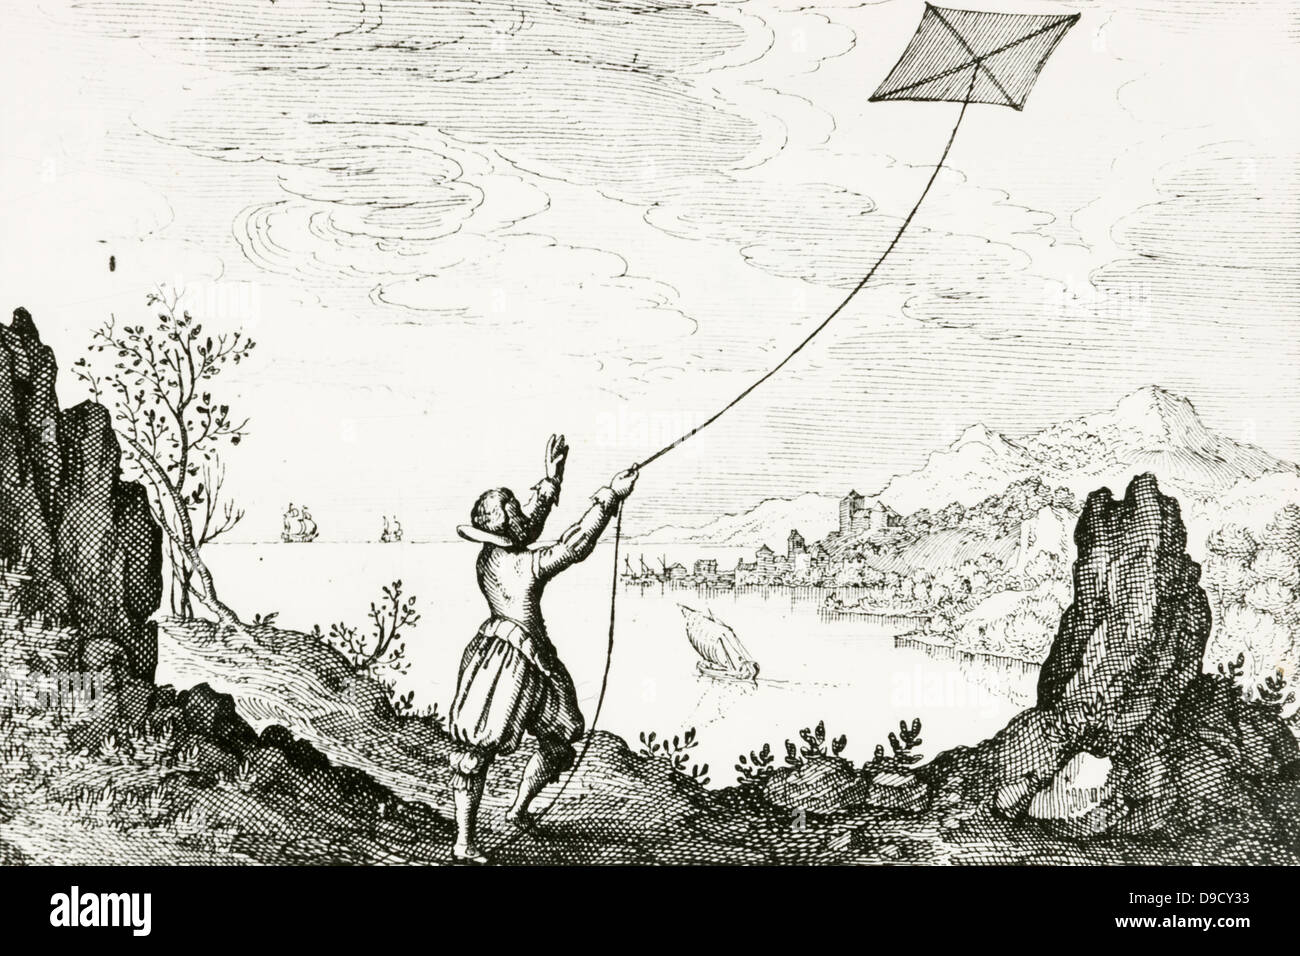 Man flying a kite, symbolising the striving of the soul for its place in the ultimate higher sphere of the universe.   From Utriusque cosmi ... historia , Oppenheim, 1617-1619, by Robert Fludd. Stock Photo